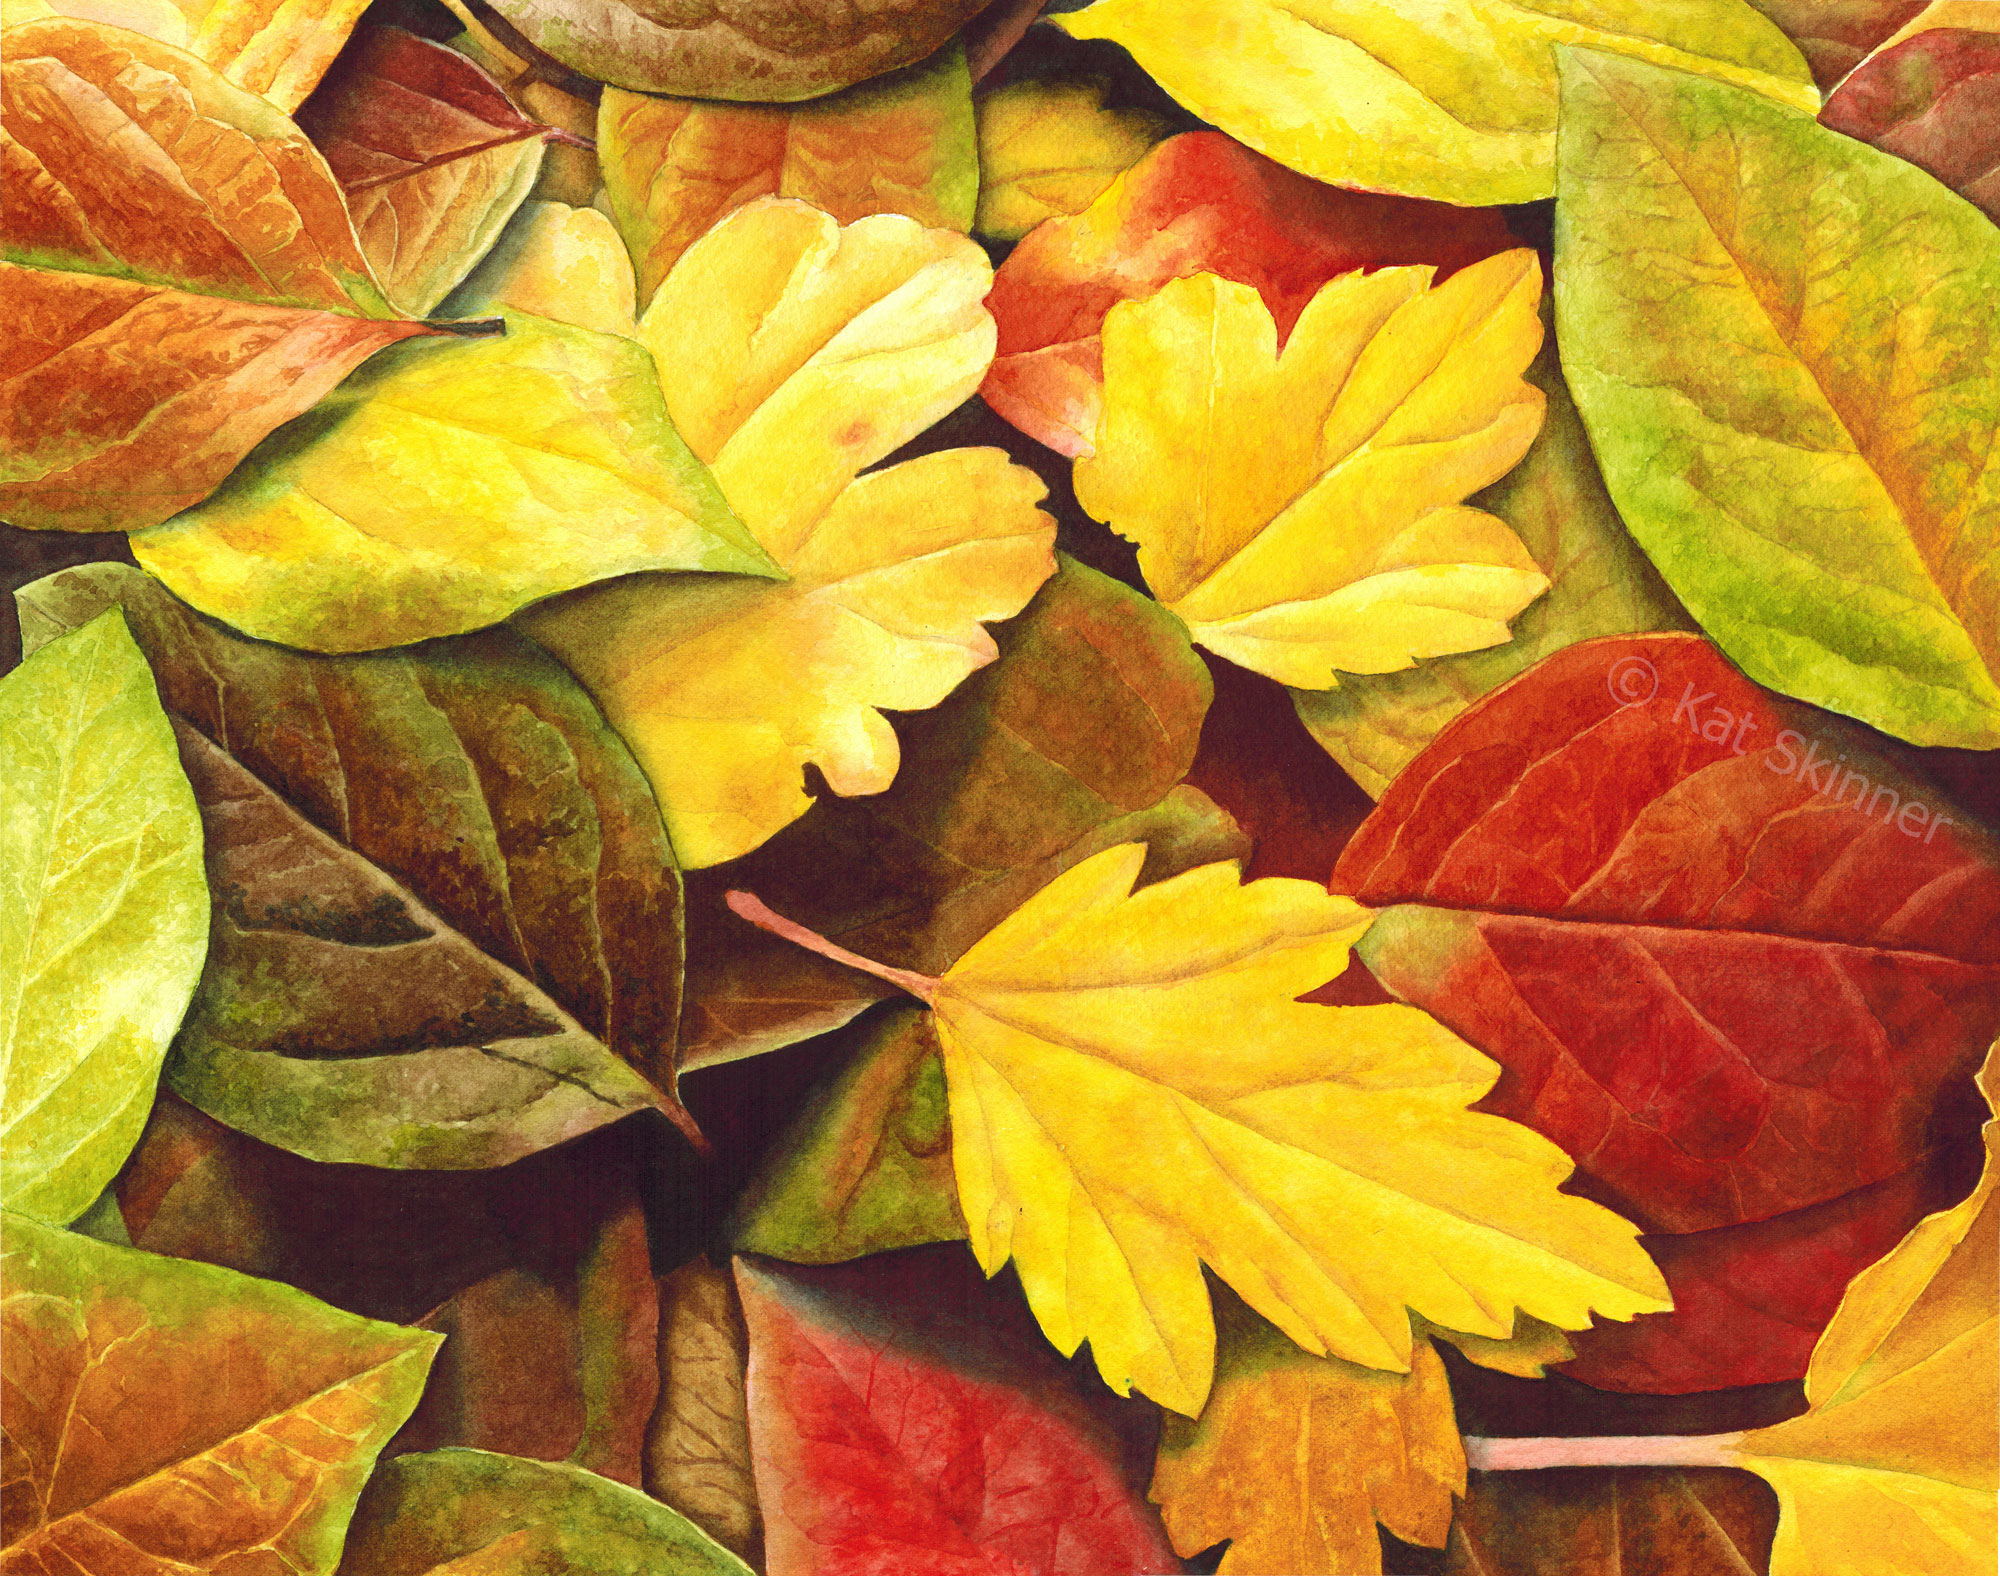 How I Painted The Autumn Leaves Watercolor Painting – Kat Skinner